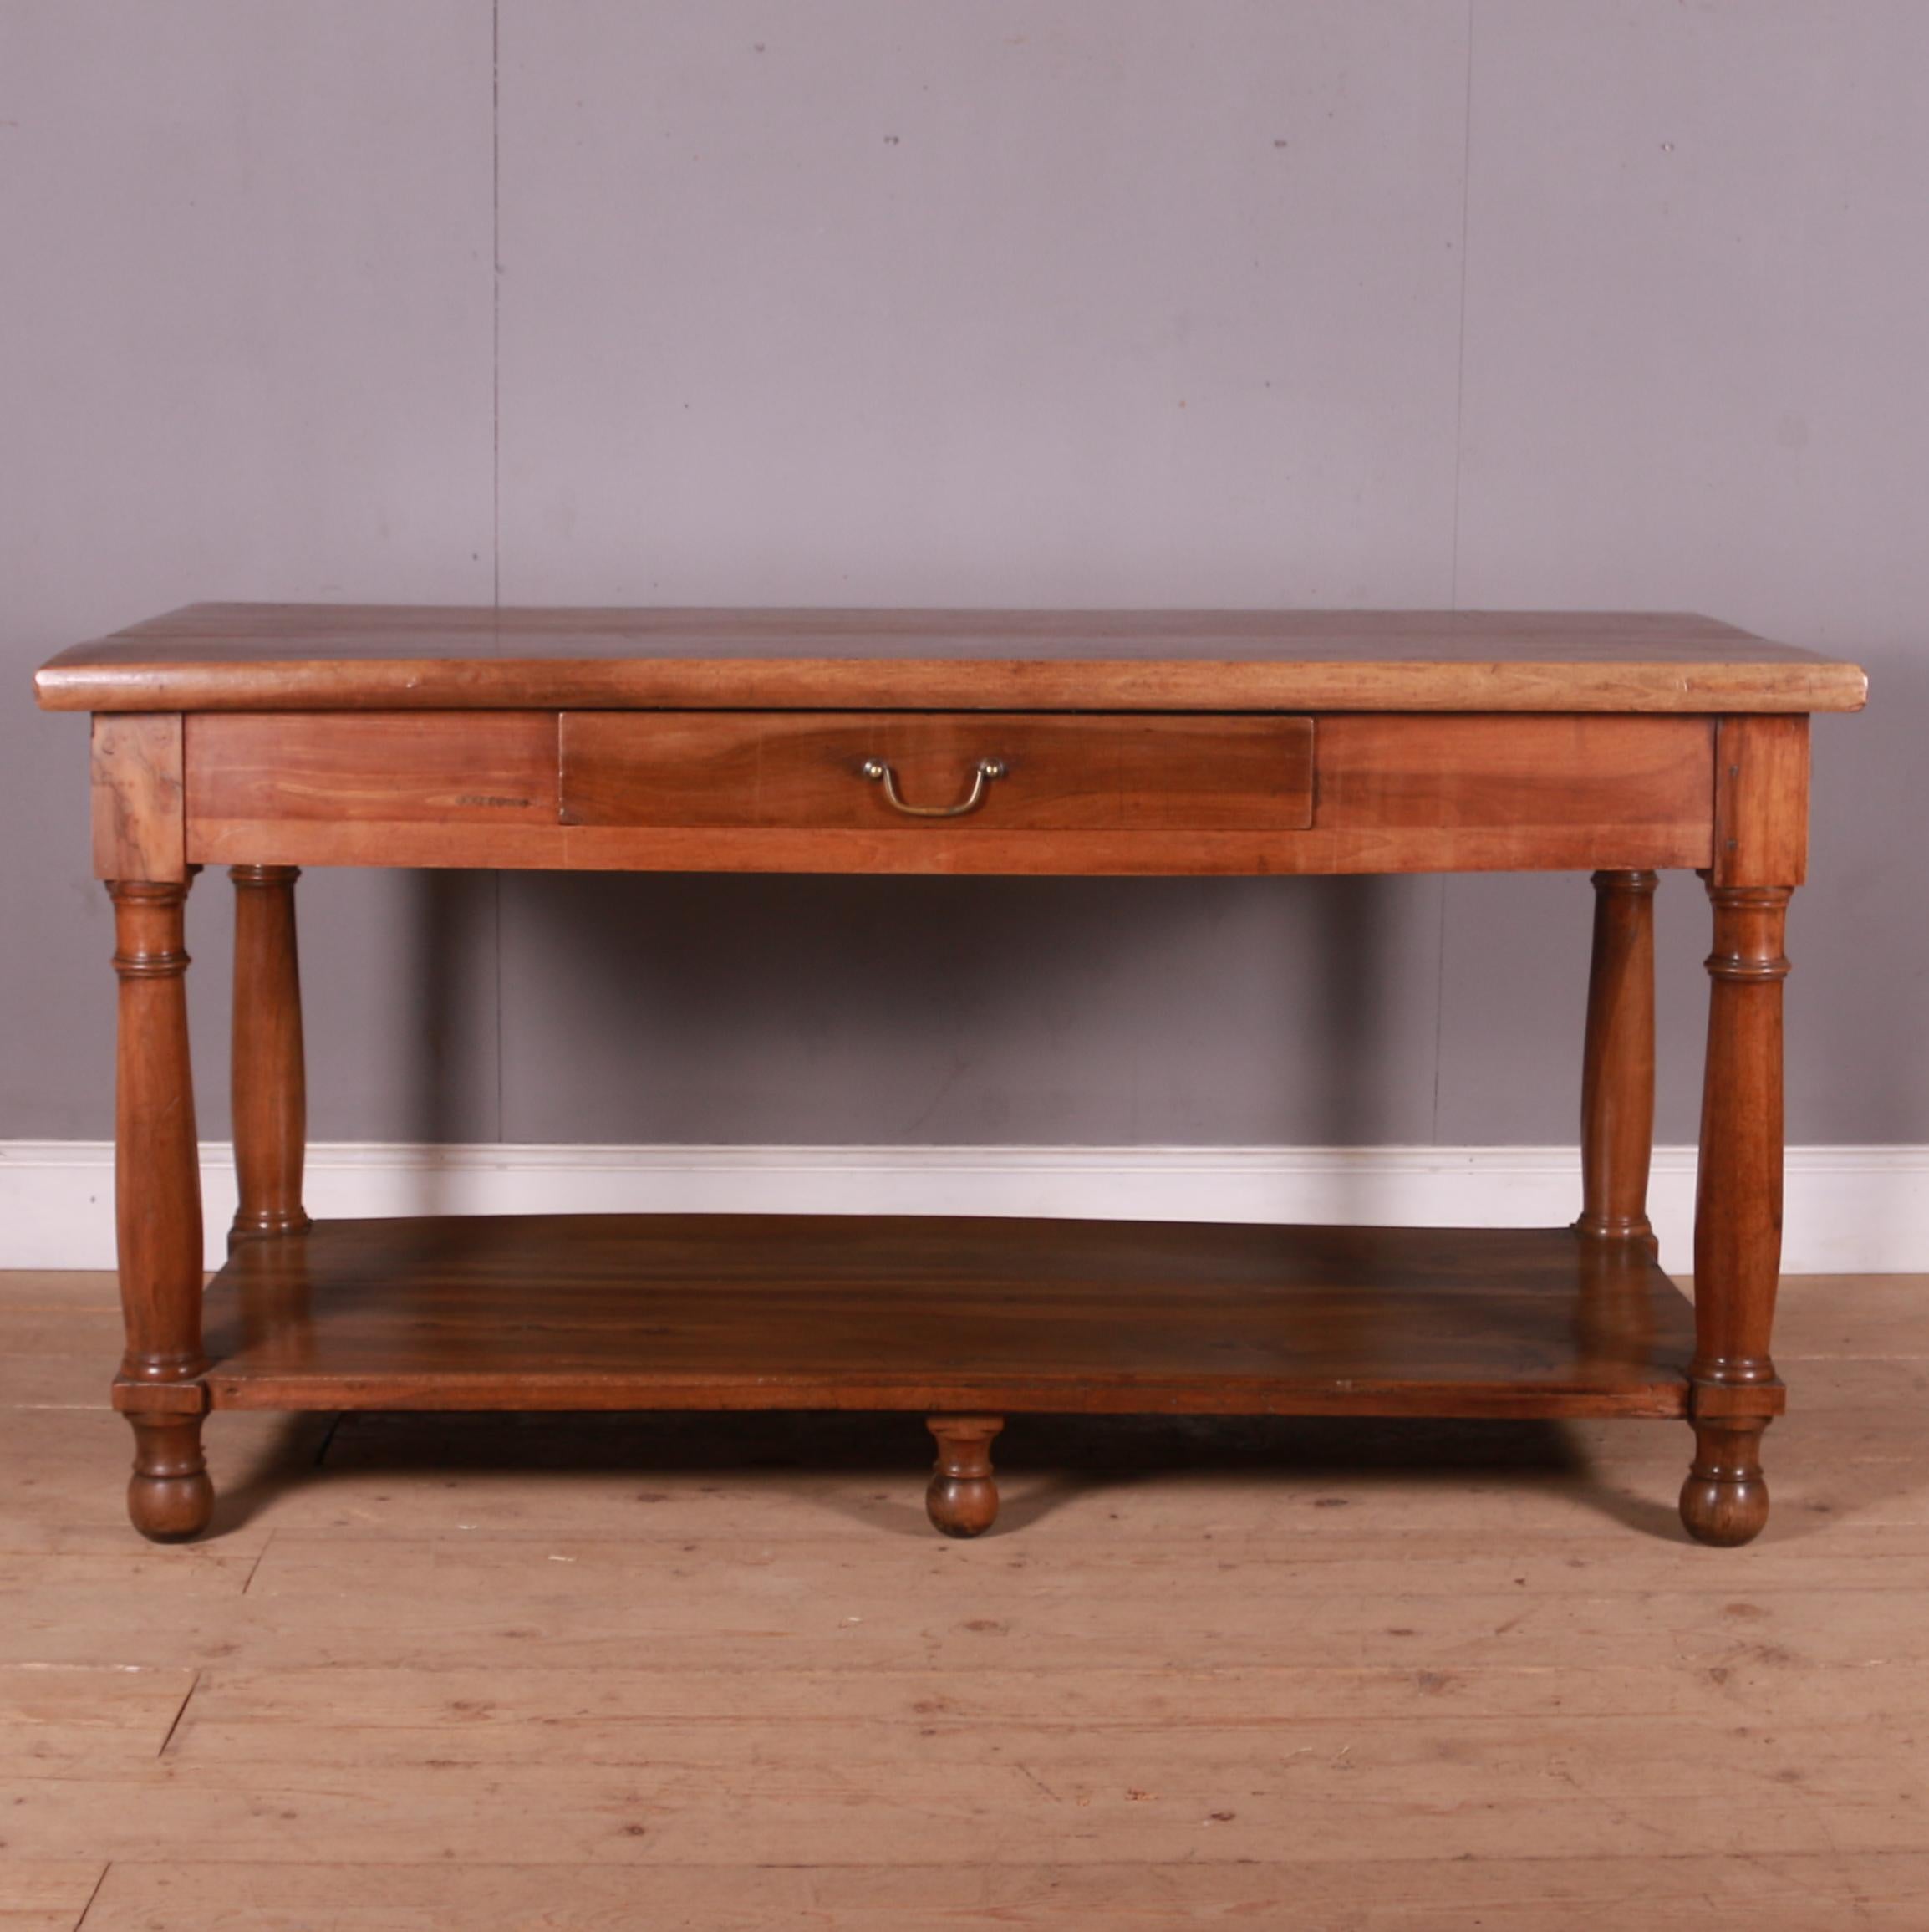 Wonderful early 19th C French Walnut 1 drawer drapers table / centre table. Wonderful 2